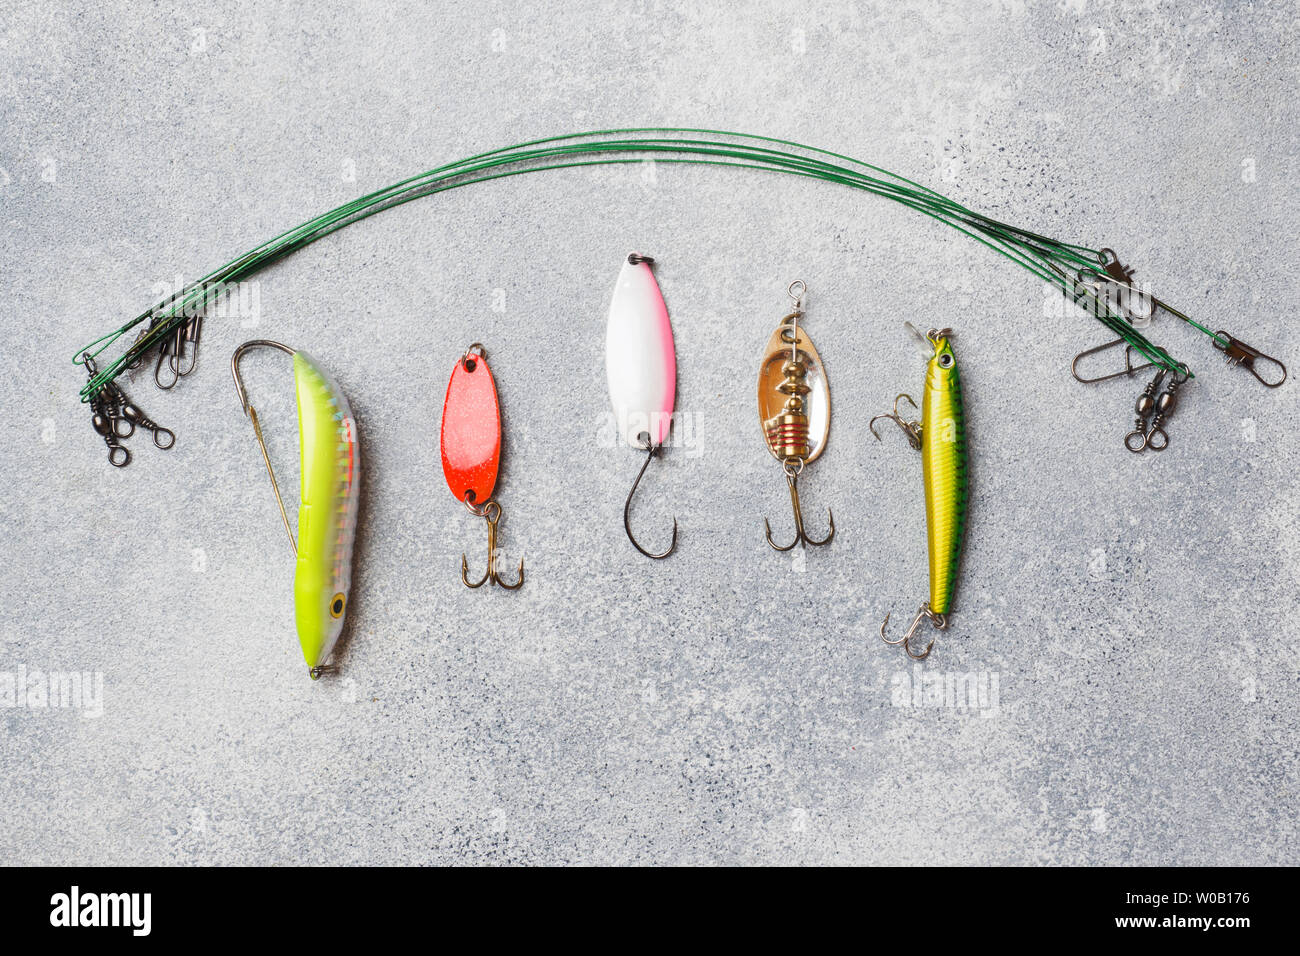 https://c8.alamy.com/comp/W0B176/fishing-hooks-and-baits-in-a-set-for-catching-different-fish-on-a-grey-background-with-copy-space-flat-lay-W0B176.jpg